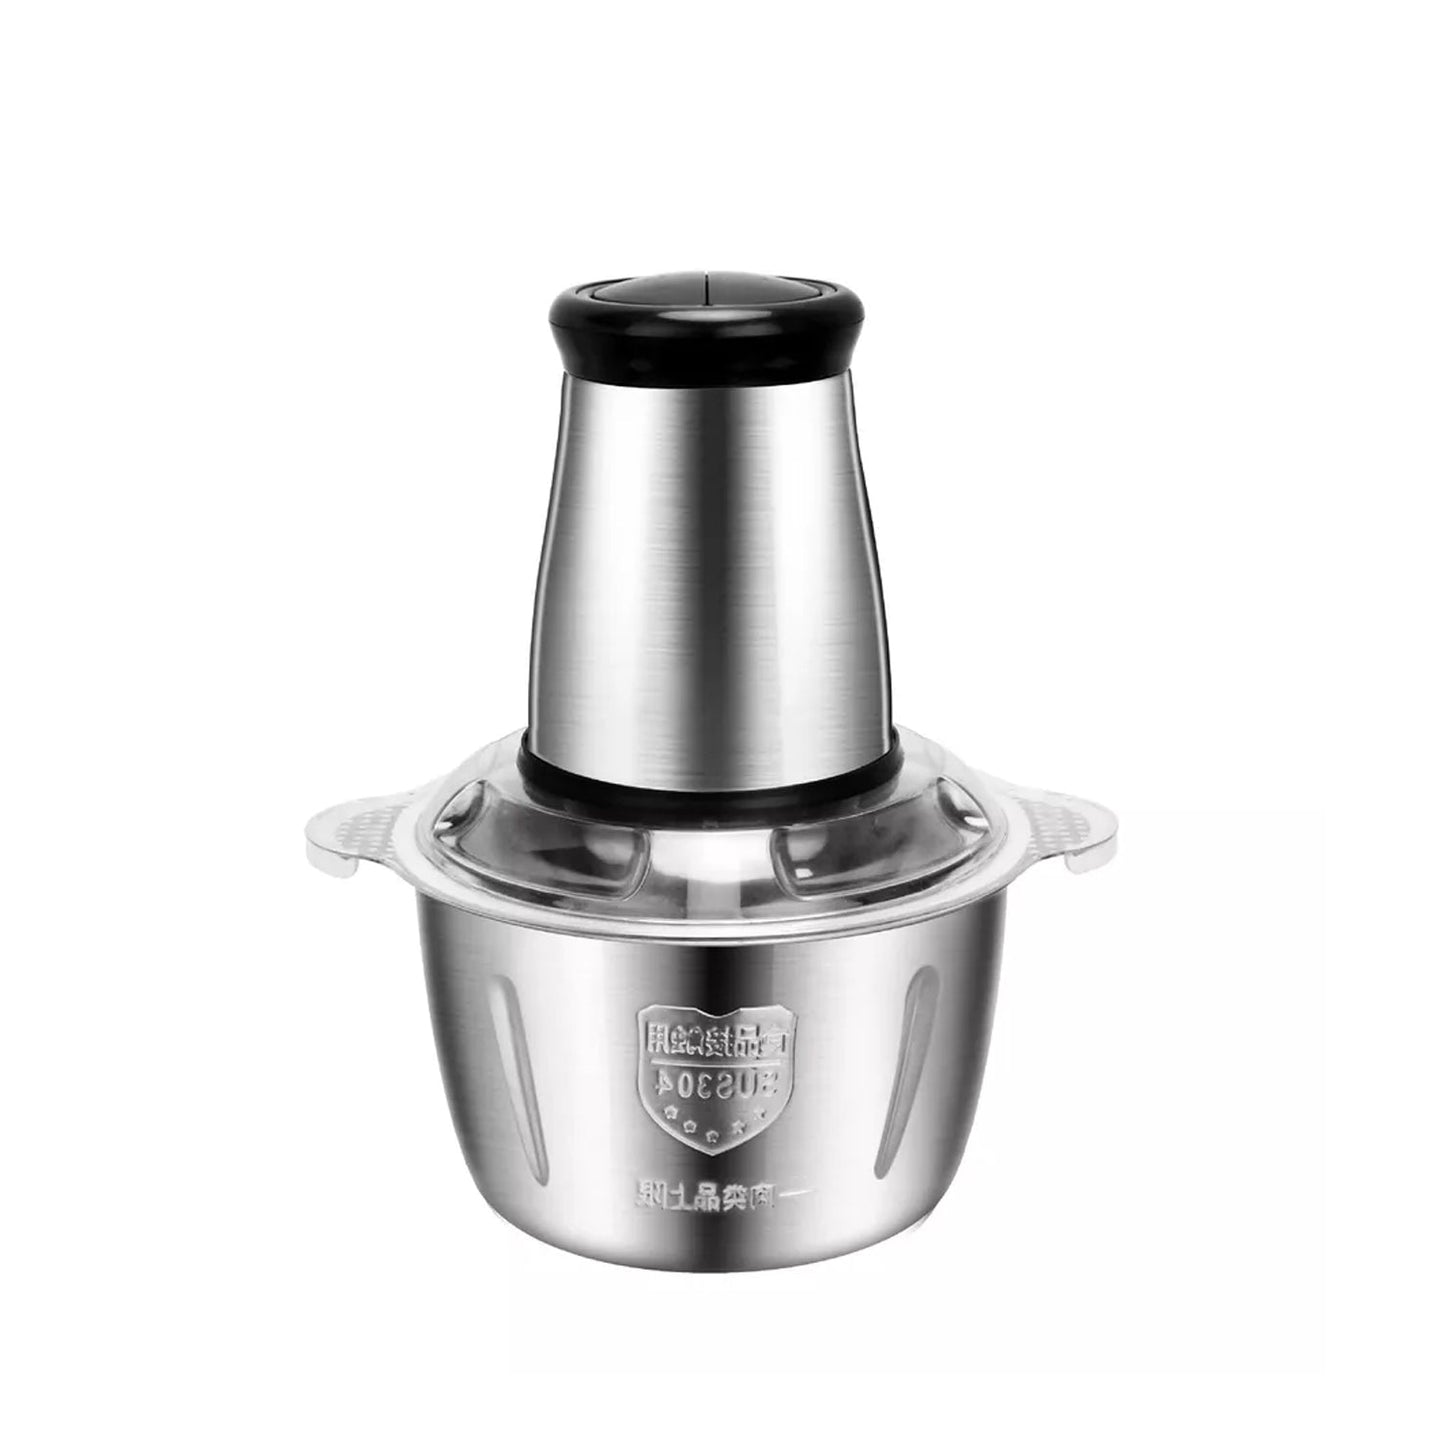 5104 3Ltr Electric Food Processor Stainless Steel Onion Cutter Multi Chopper 2 Speed Levels 5 Blades Universal Chopper for kitchen DeoDap